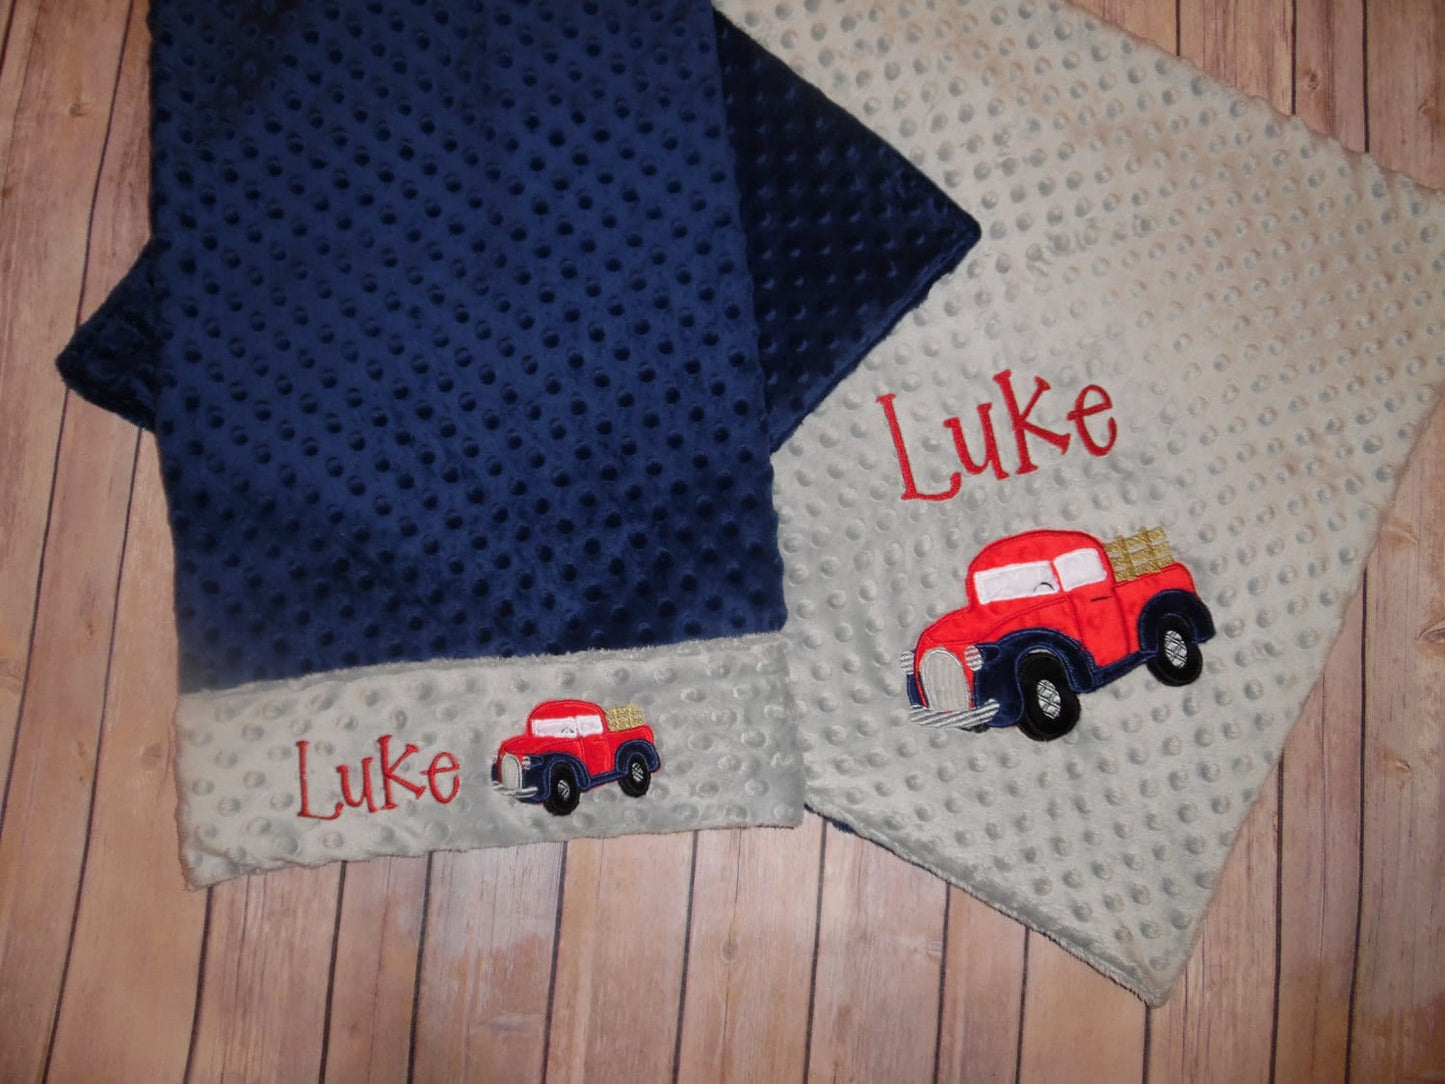 Antique Truck Nap Set - Personalized Minky Blanket and Pillowcase with embroidered Antique Truck - Travel or Standard Size